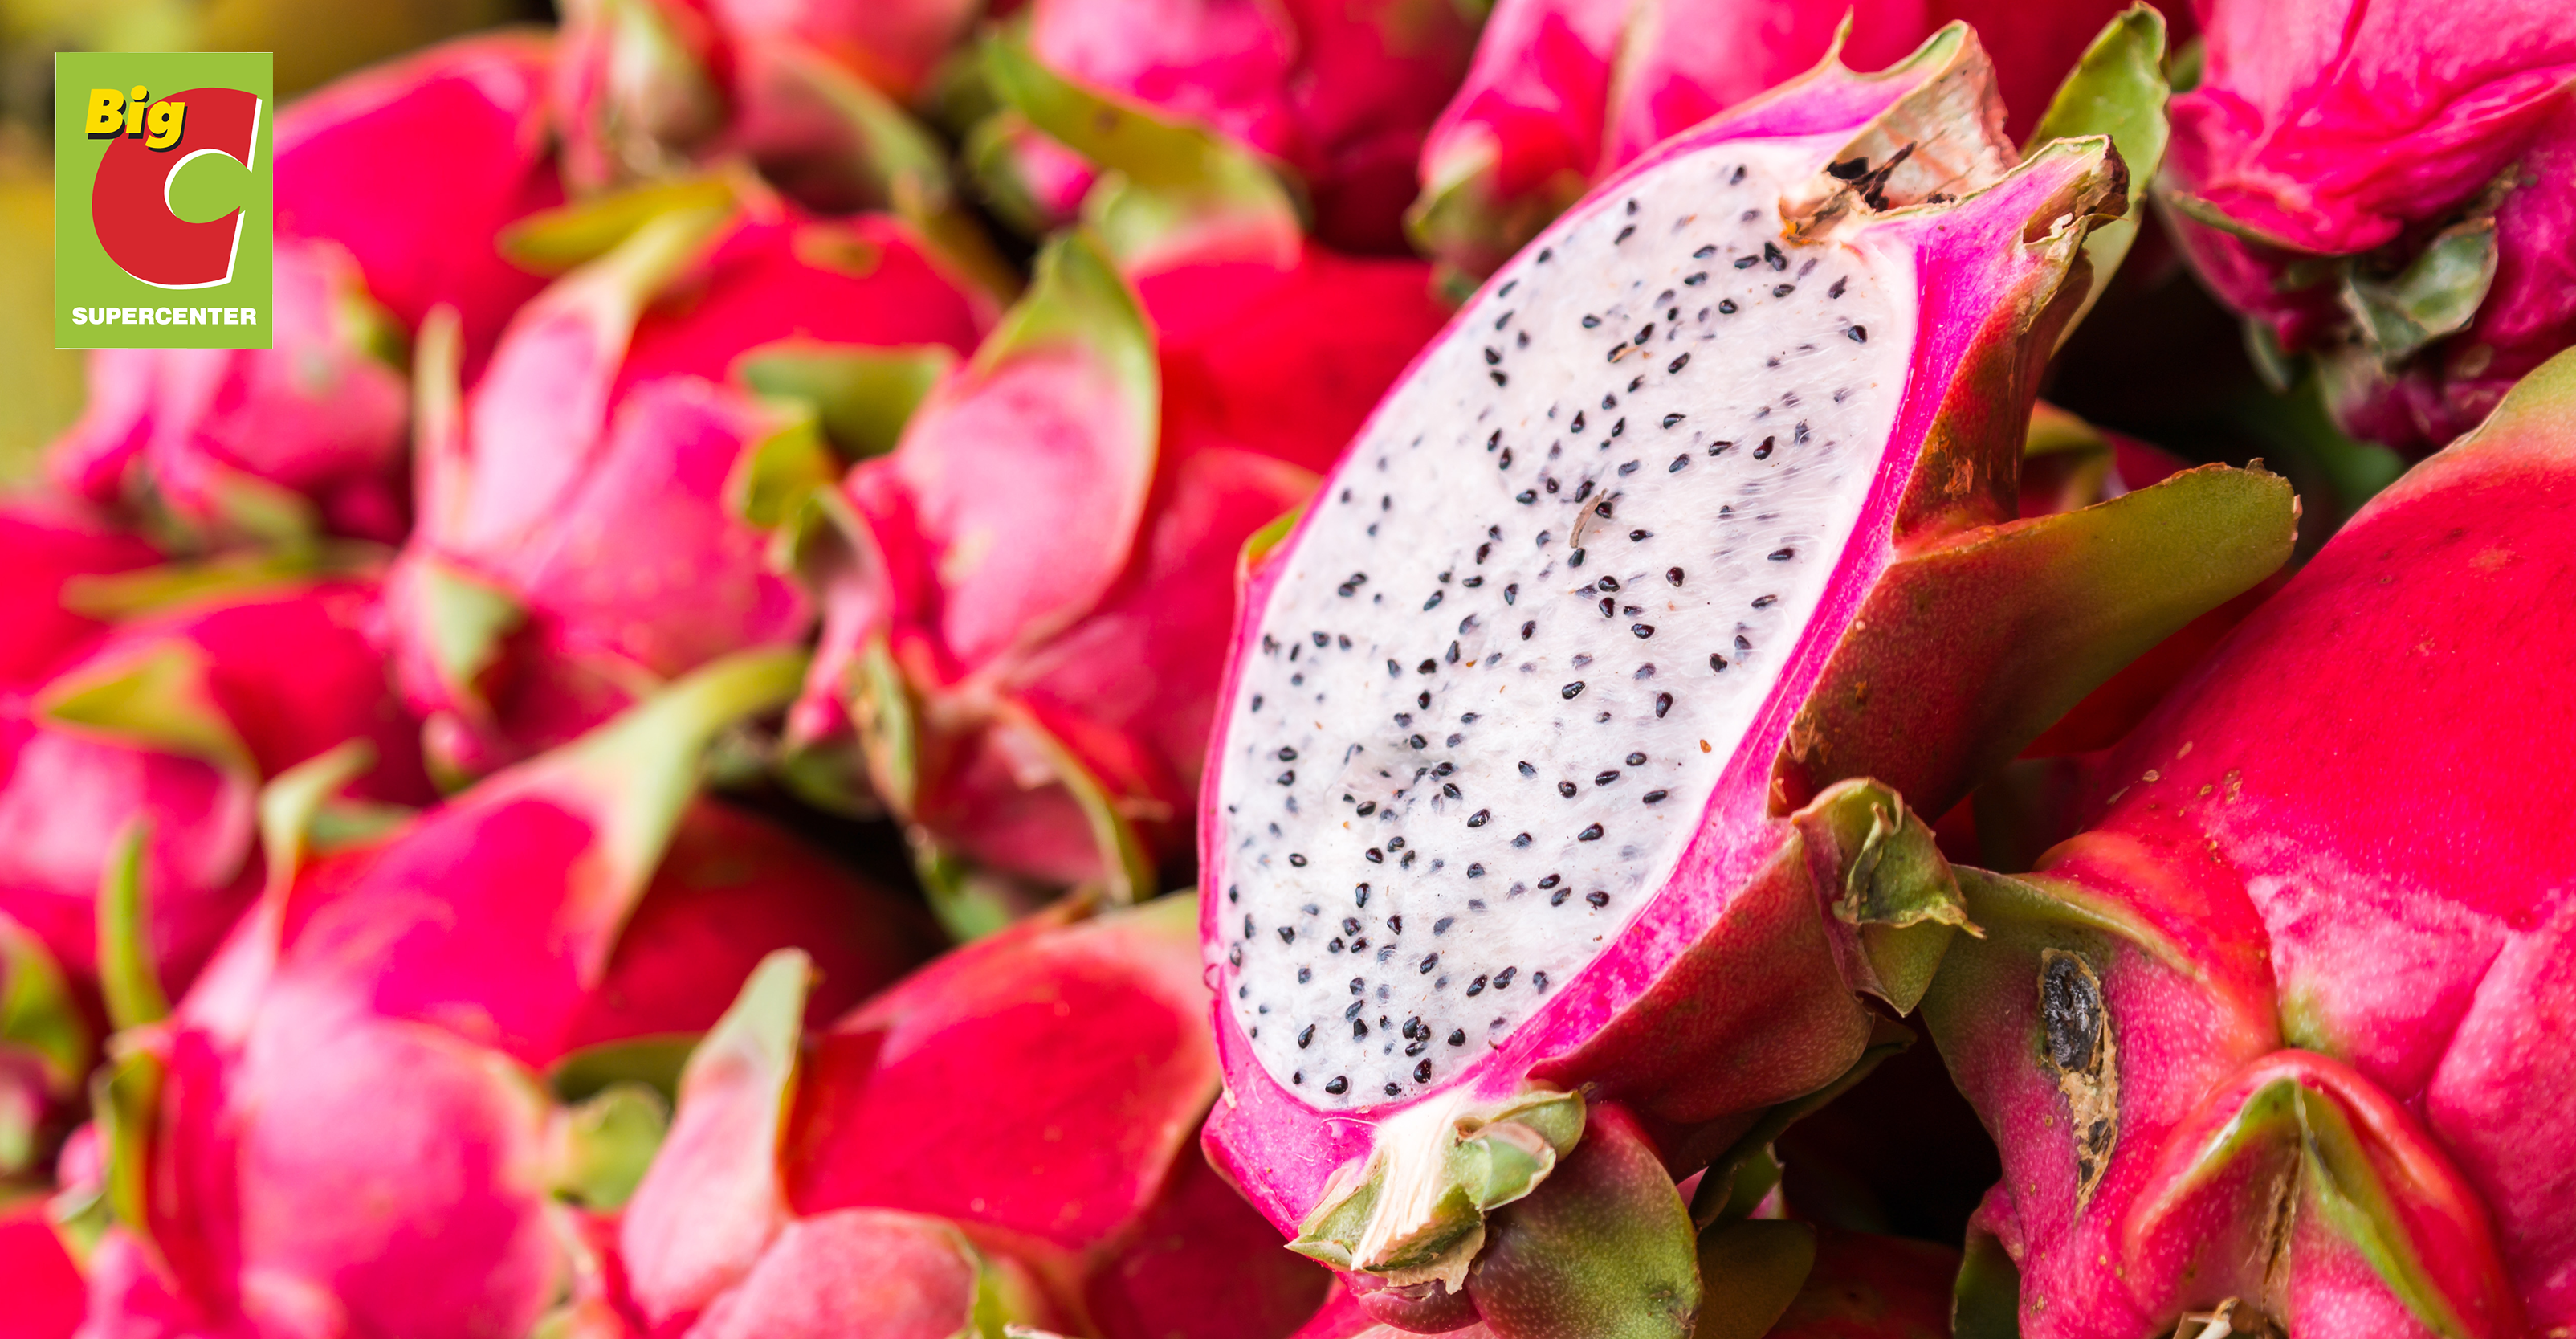 Big C & GO! to assist local farmers in marketing and selling 500 tons of Binh Thuan dragon fruits